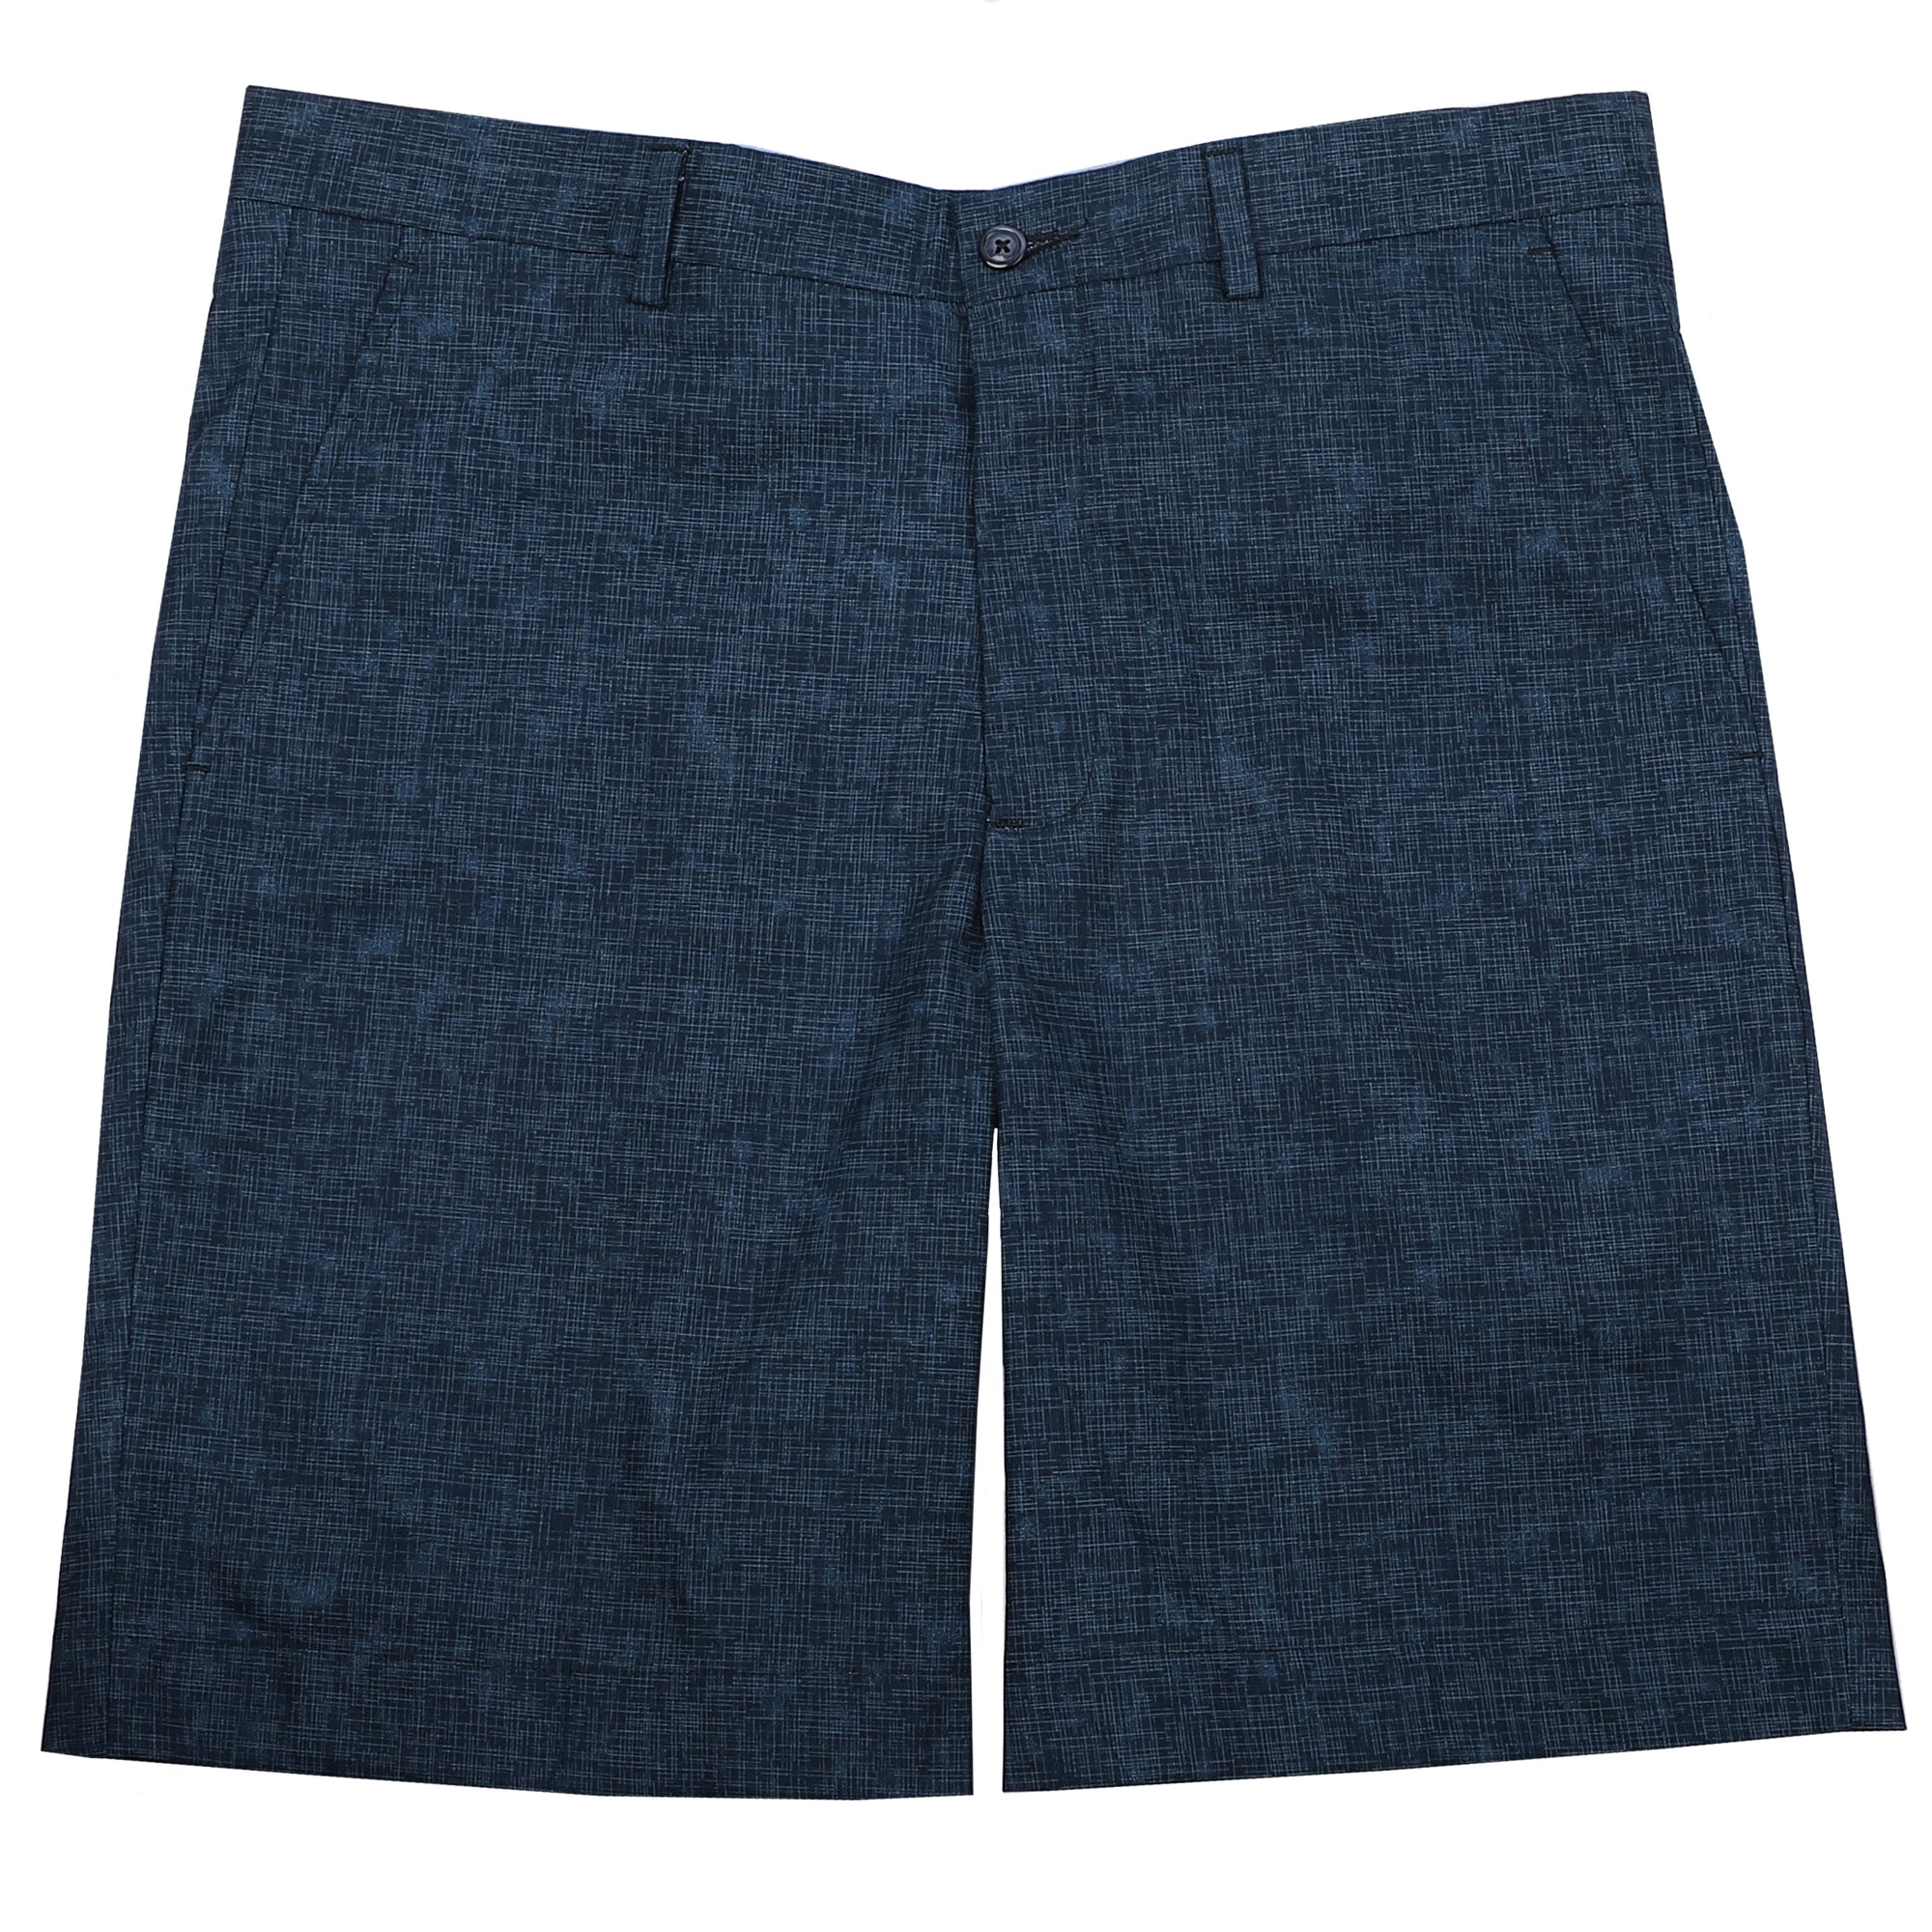 Keep it in neutral with a little intrigue with navy and subtle crosshatch printed on 100% cotton warm weather ready shorts.  100% Cotton • Traditional Fit • Flat Front • Button Through Closure • Two Front Slash Pockets • 9" Inseam • Machine Washable • Imported